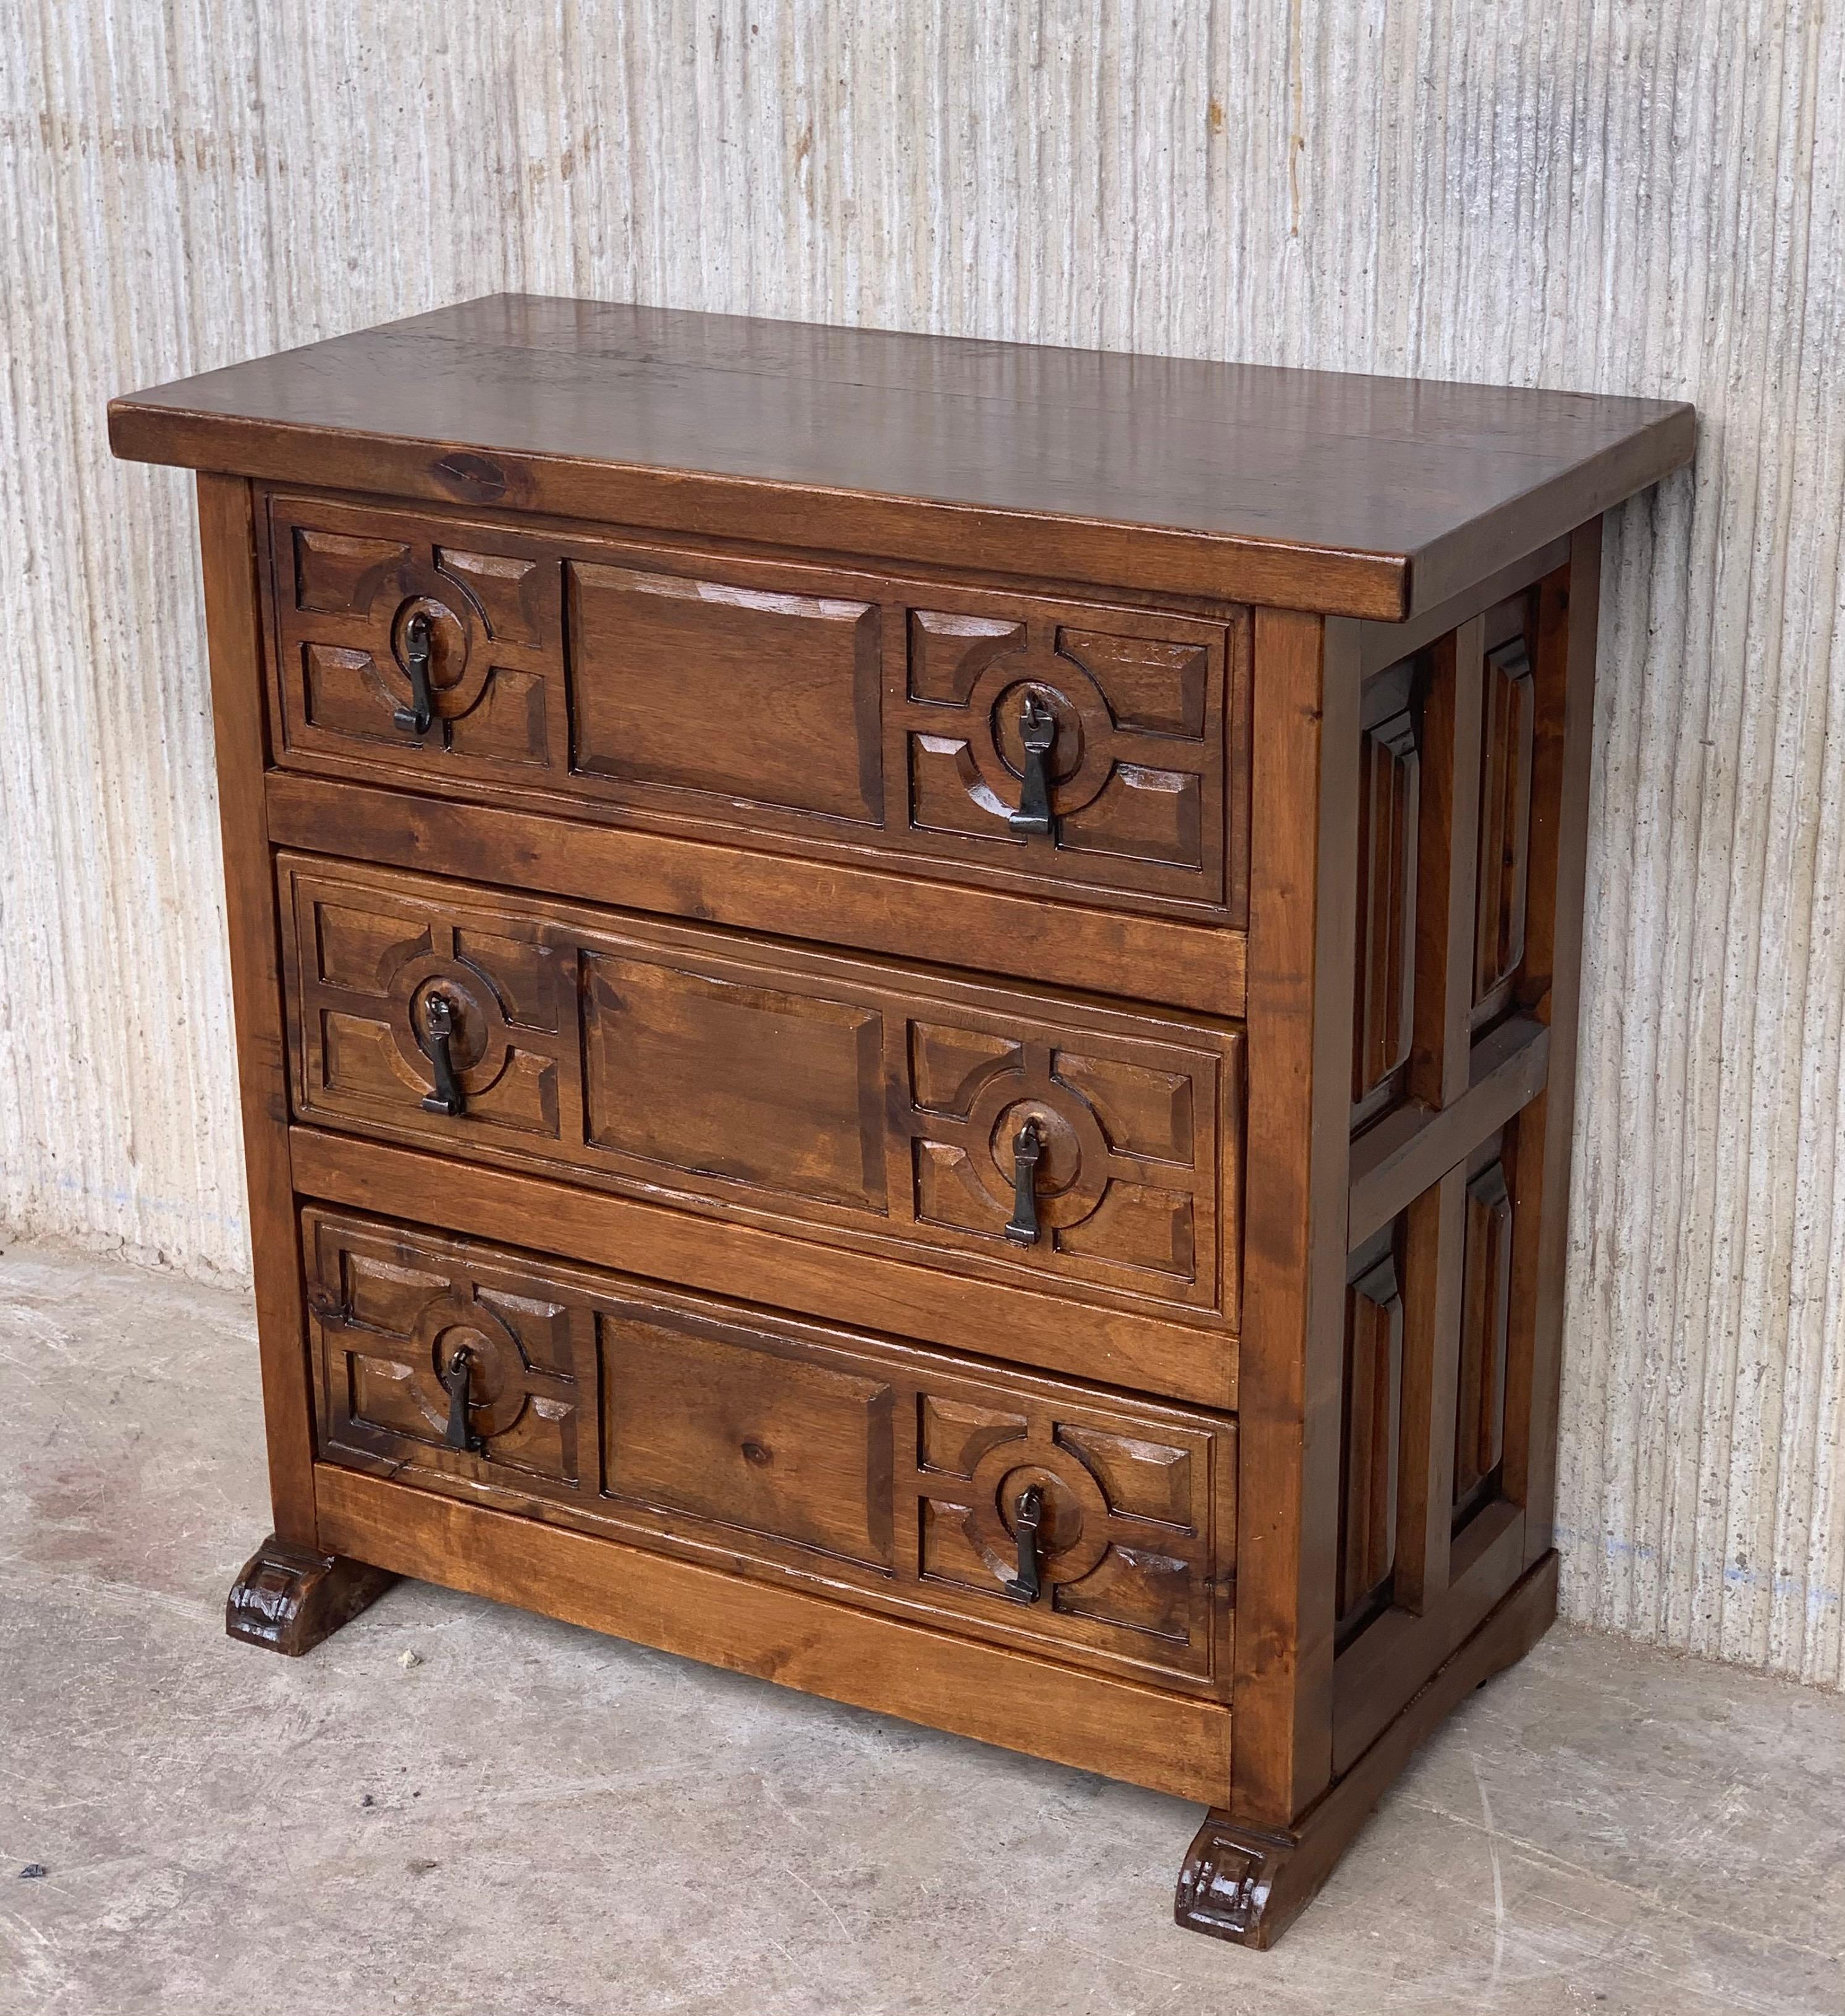 Hand-Carved 19th Century Catalan Spanish Carved Walnut Console or Night Table, Three Drawers